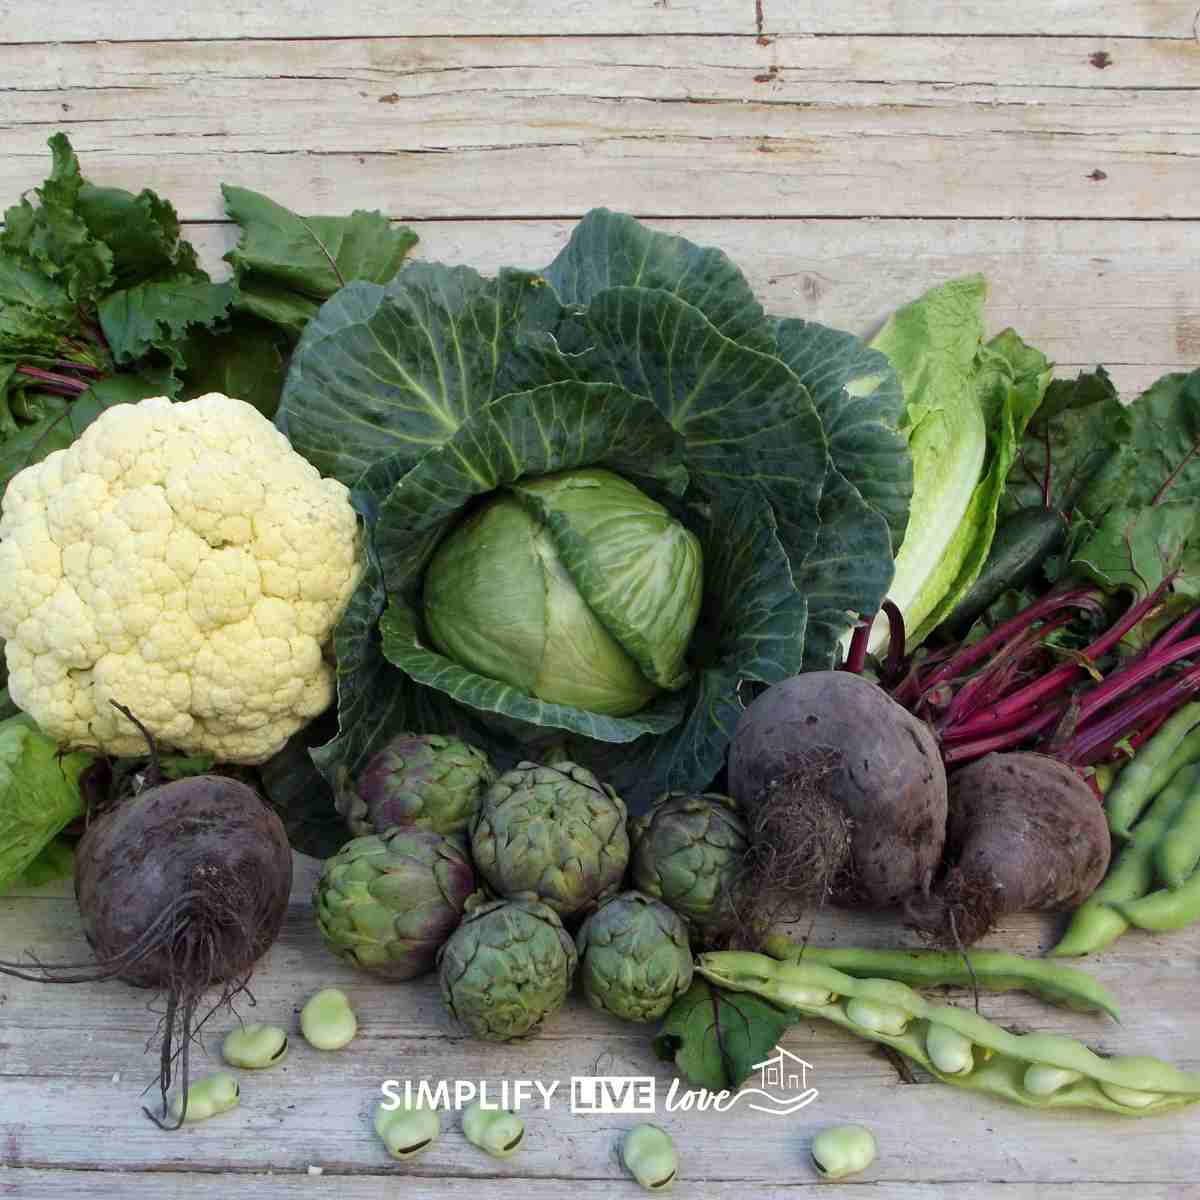 A winter harvest of cauliflower, cabbage, beets, and greens for in season winter eating.